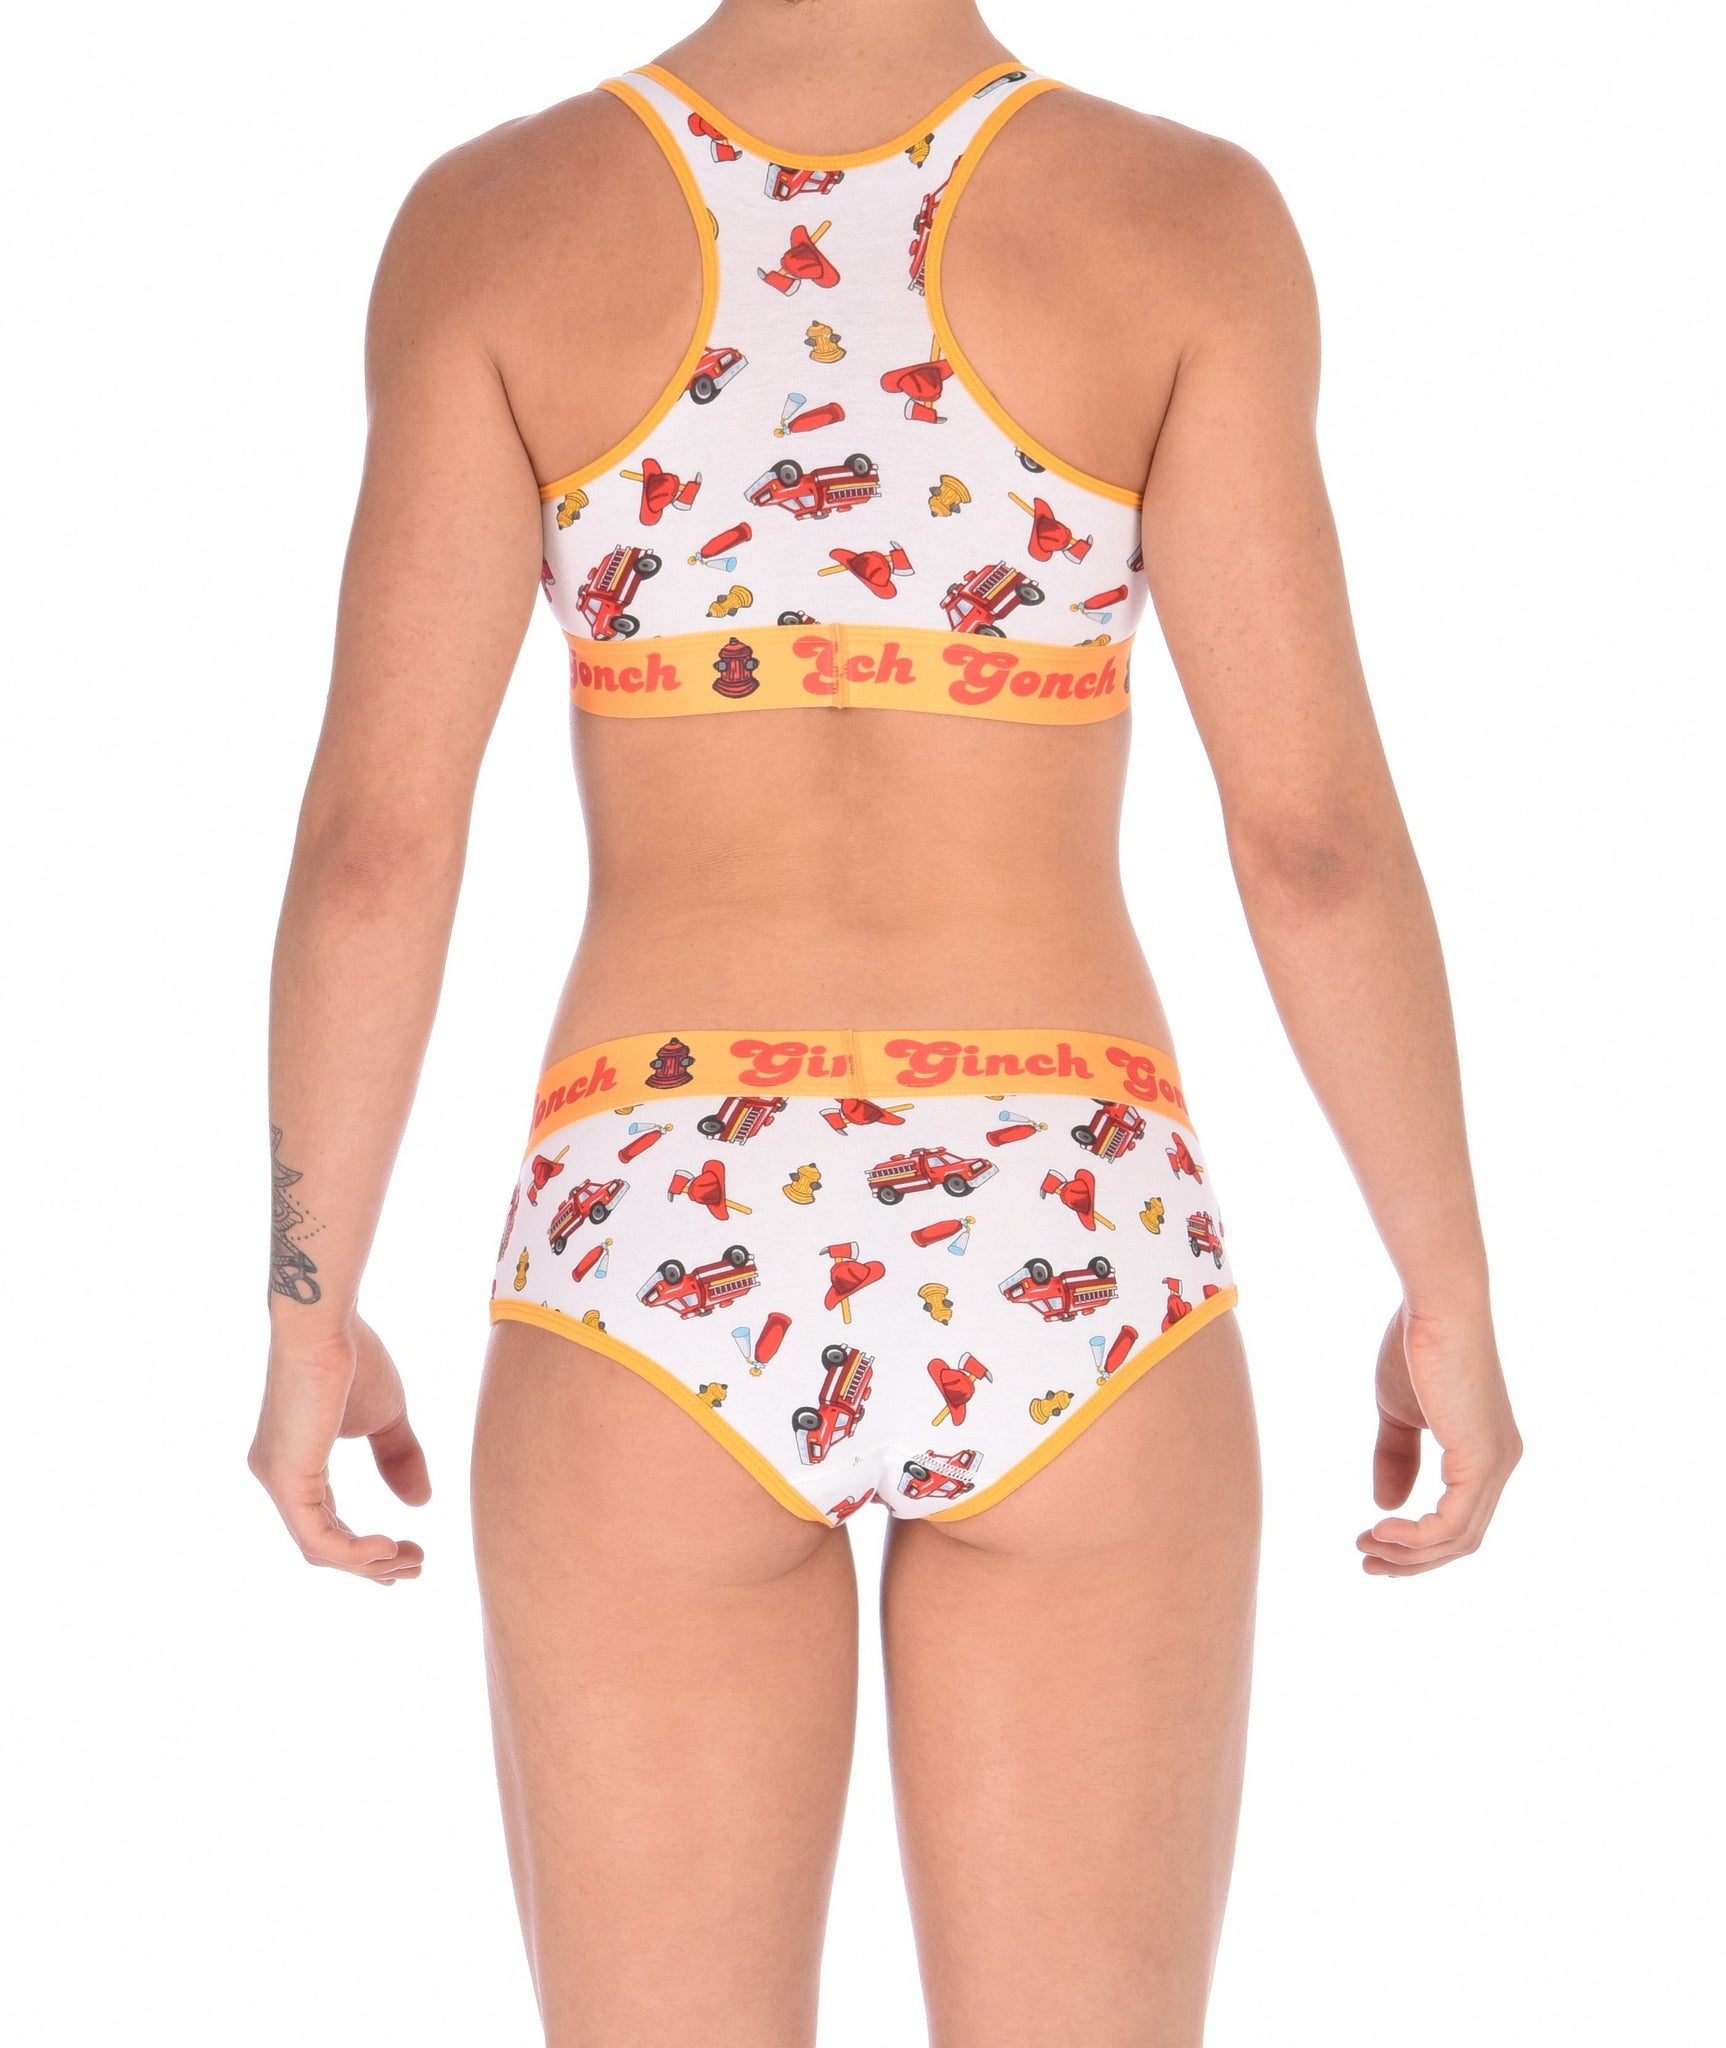 Ginch Gonch GG Fire Fighters boy cut Brief womens y front underwear white fabric with fire engines hats and hydrants, yellow trim and yellow printed waistband back shown with matching sports bra